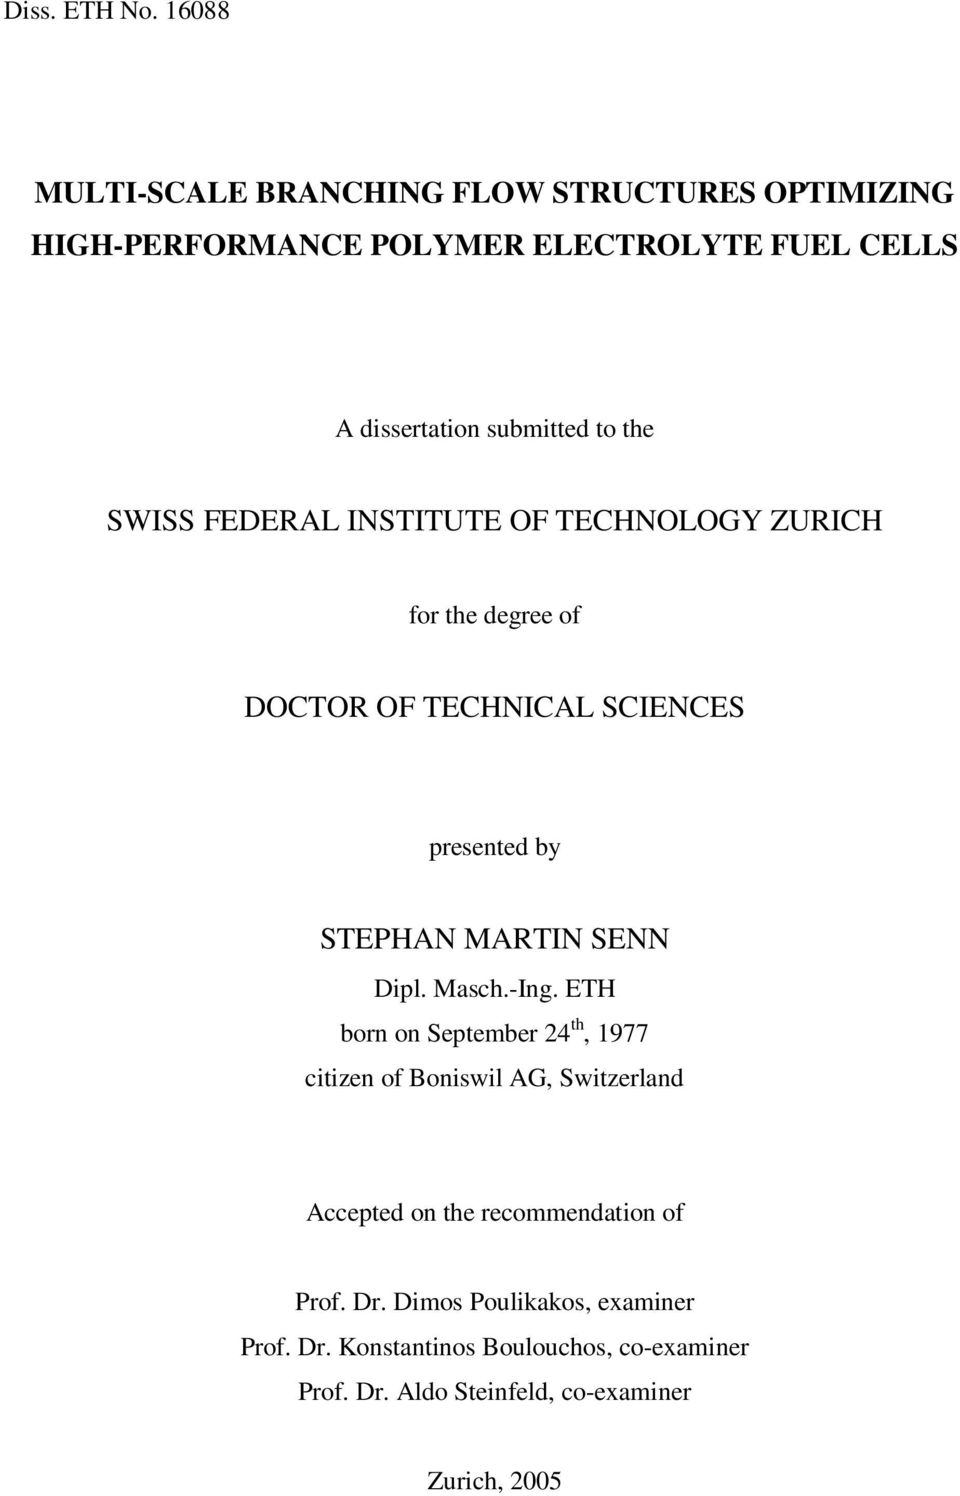 the SWISS FEDERAL INSTITUTE OF TECHNOLOGY ZURICH for the degree of DOCTOR OF TECHNICAL SCIENCES presented by STEPHAN MARTIN SENN